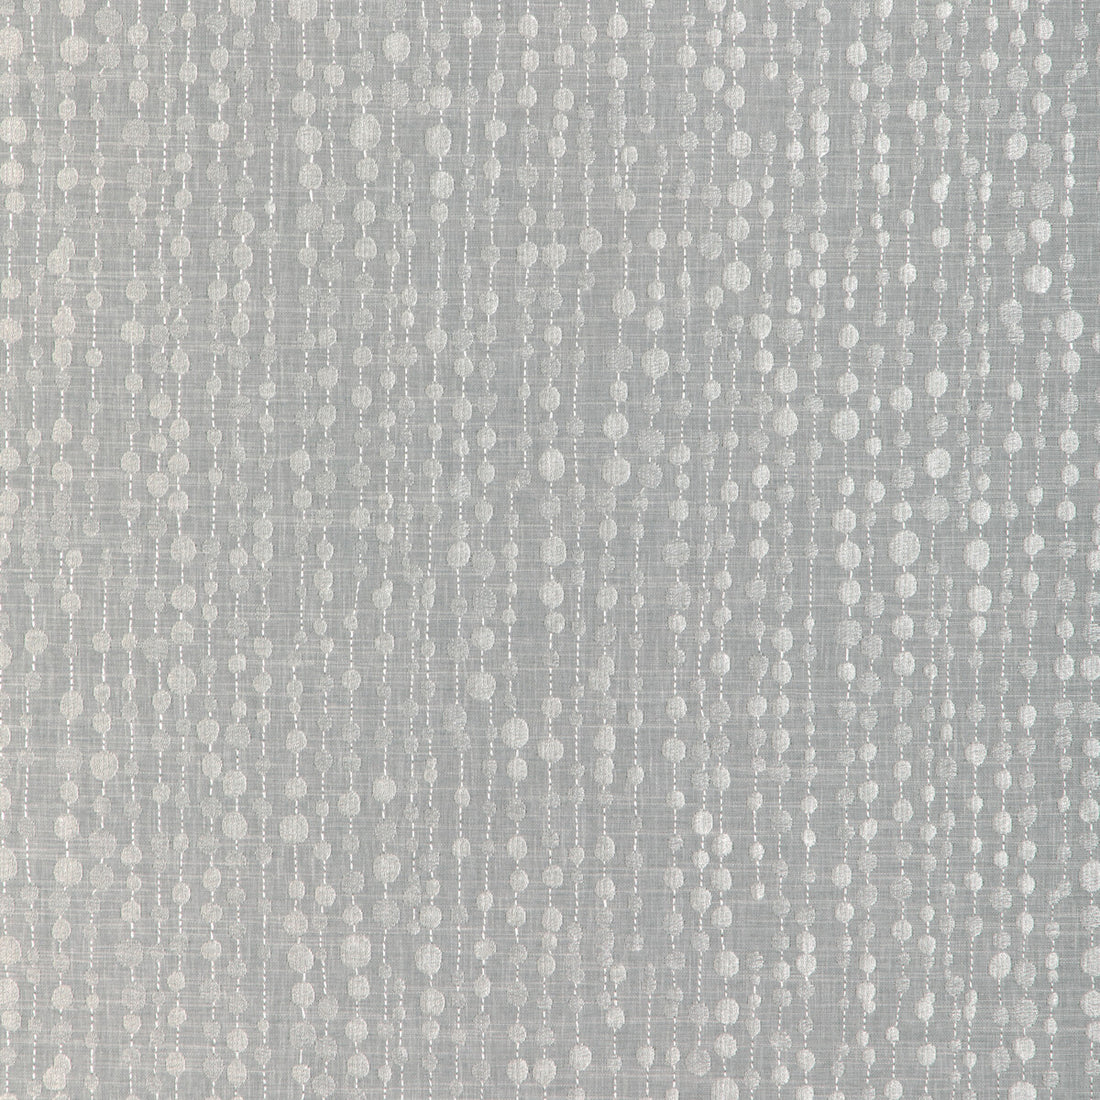 String Dot fabric in grey color - pattern 36953.11.0 - by Kravet Basics in the Mid-Century Modern collection